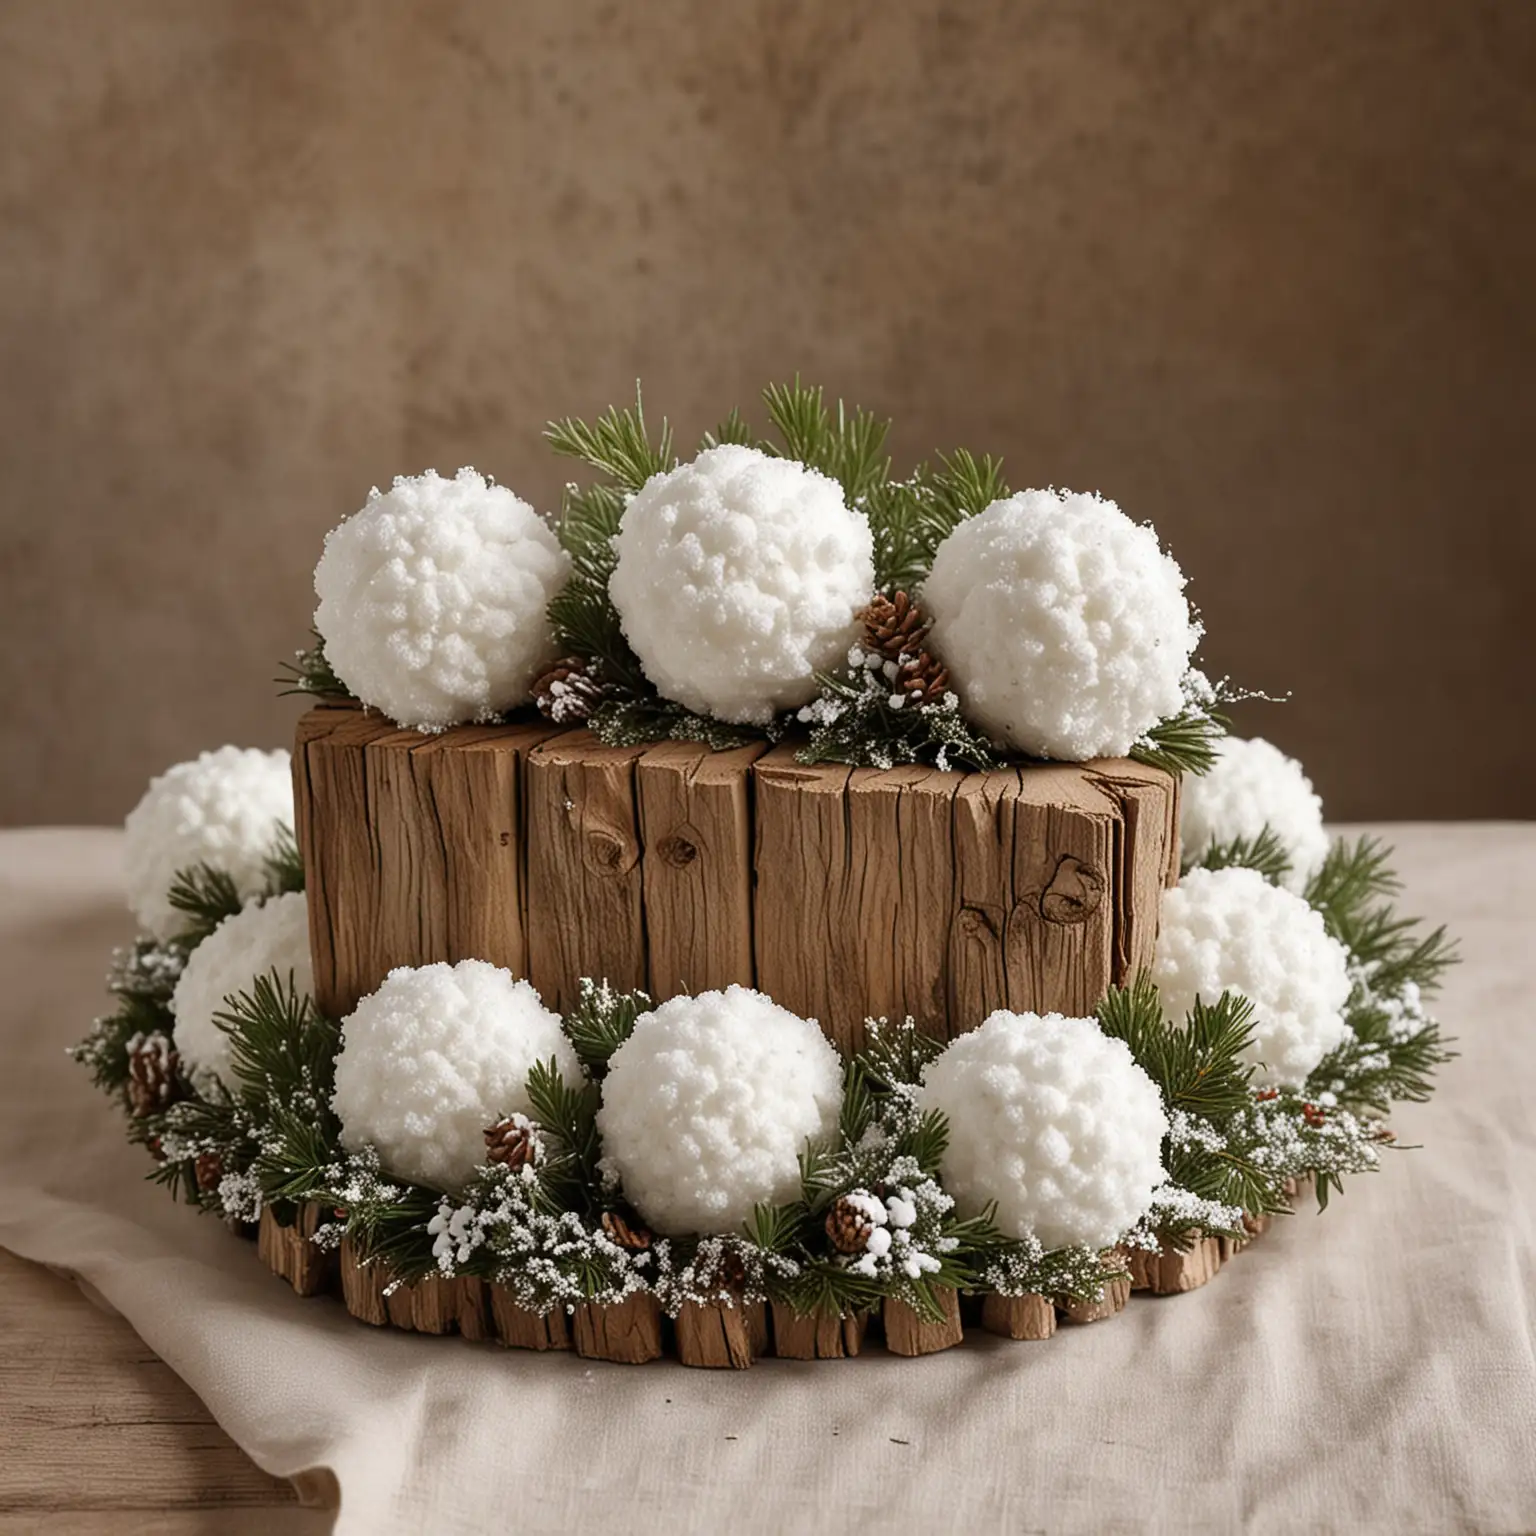 simple rustic winter wedding centerpiece with faux snowballs; keep background neutral; show centerpiece from the side as one would see it when sitting at a table